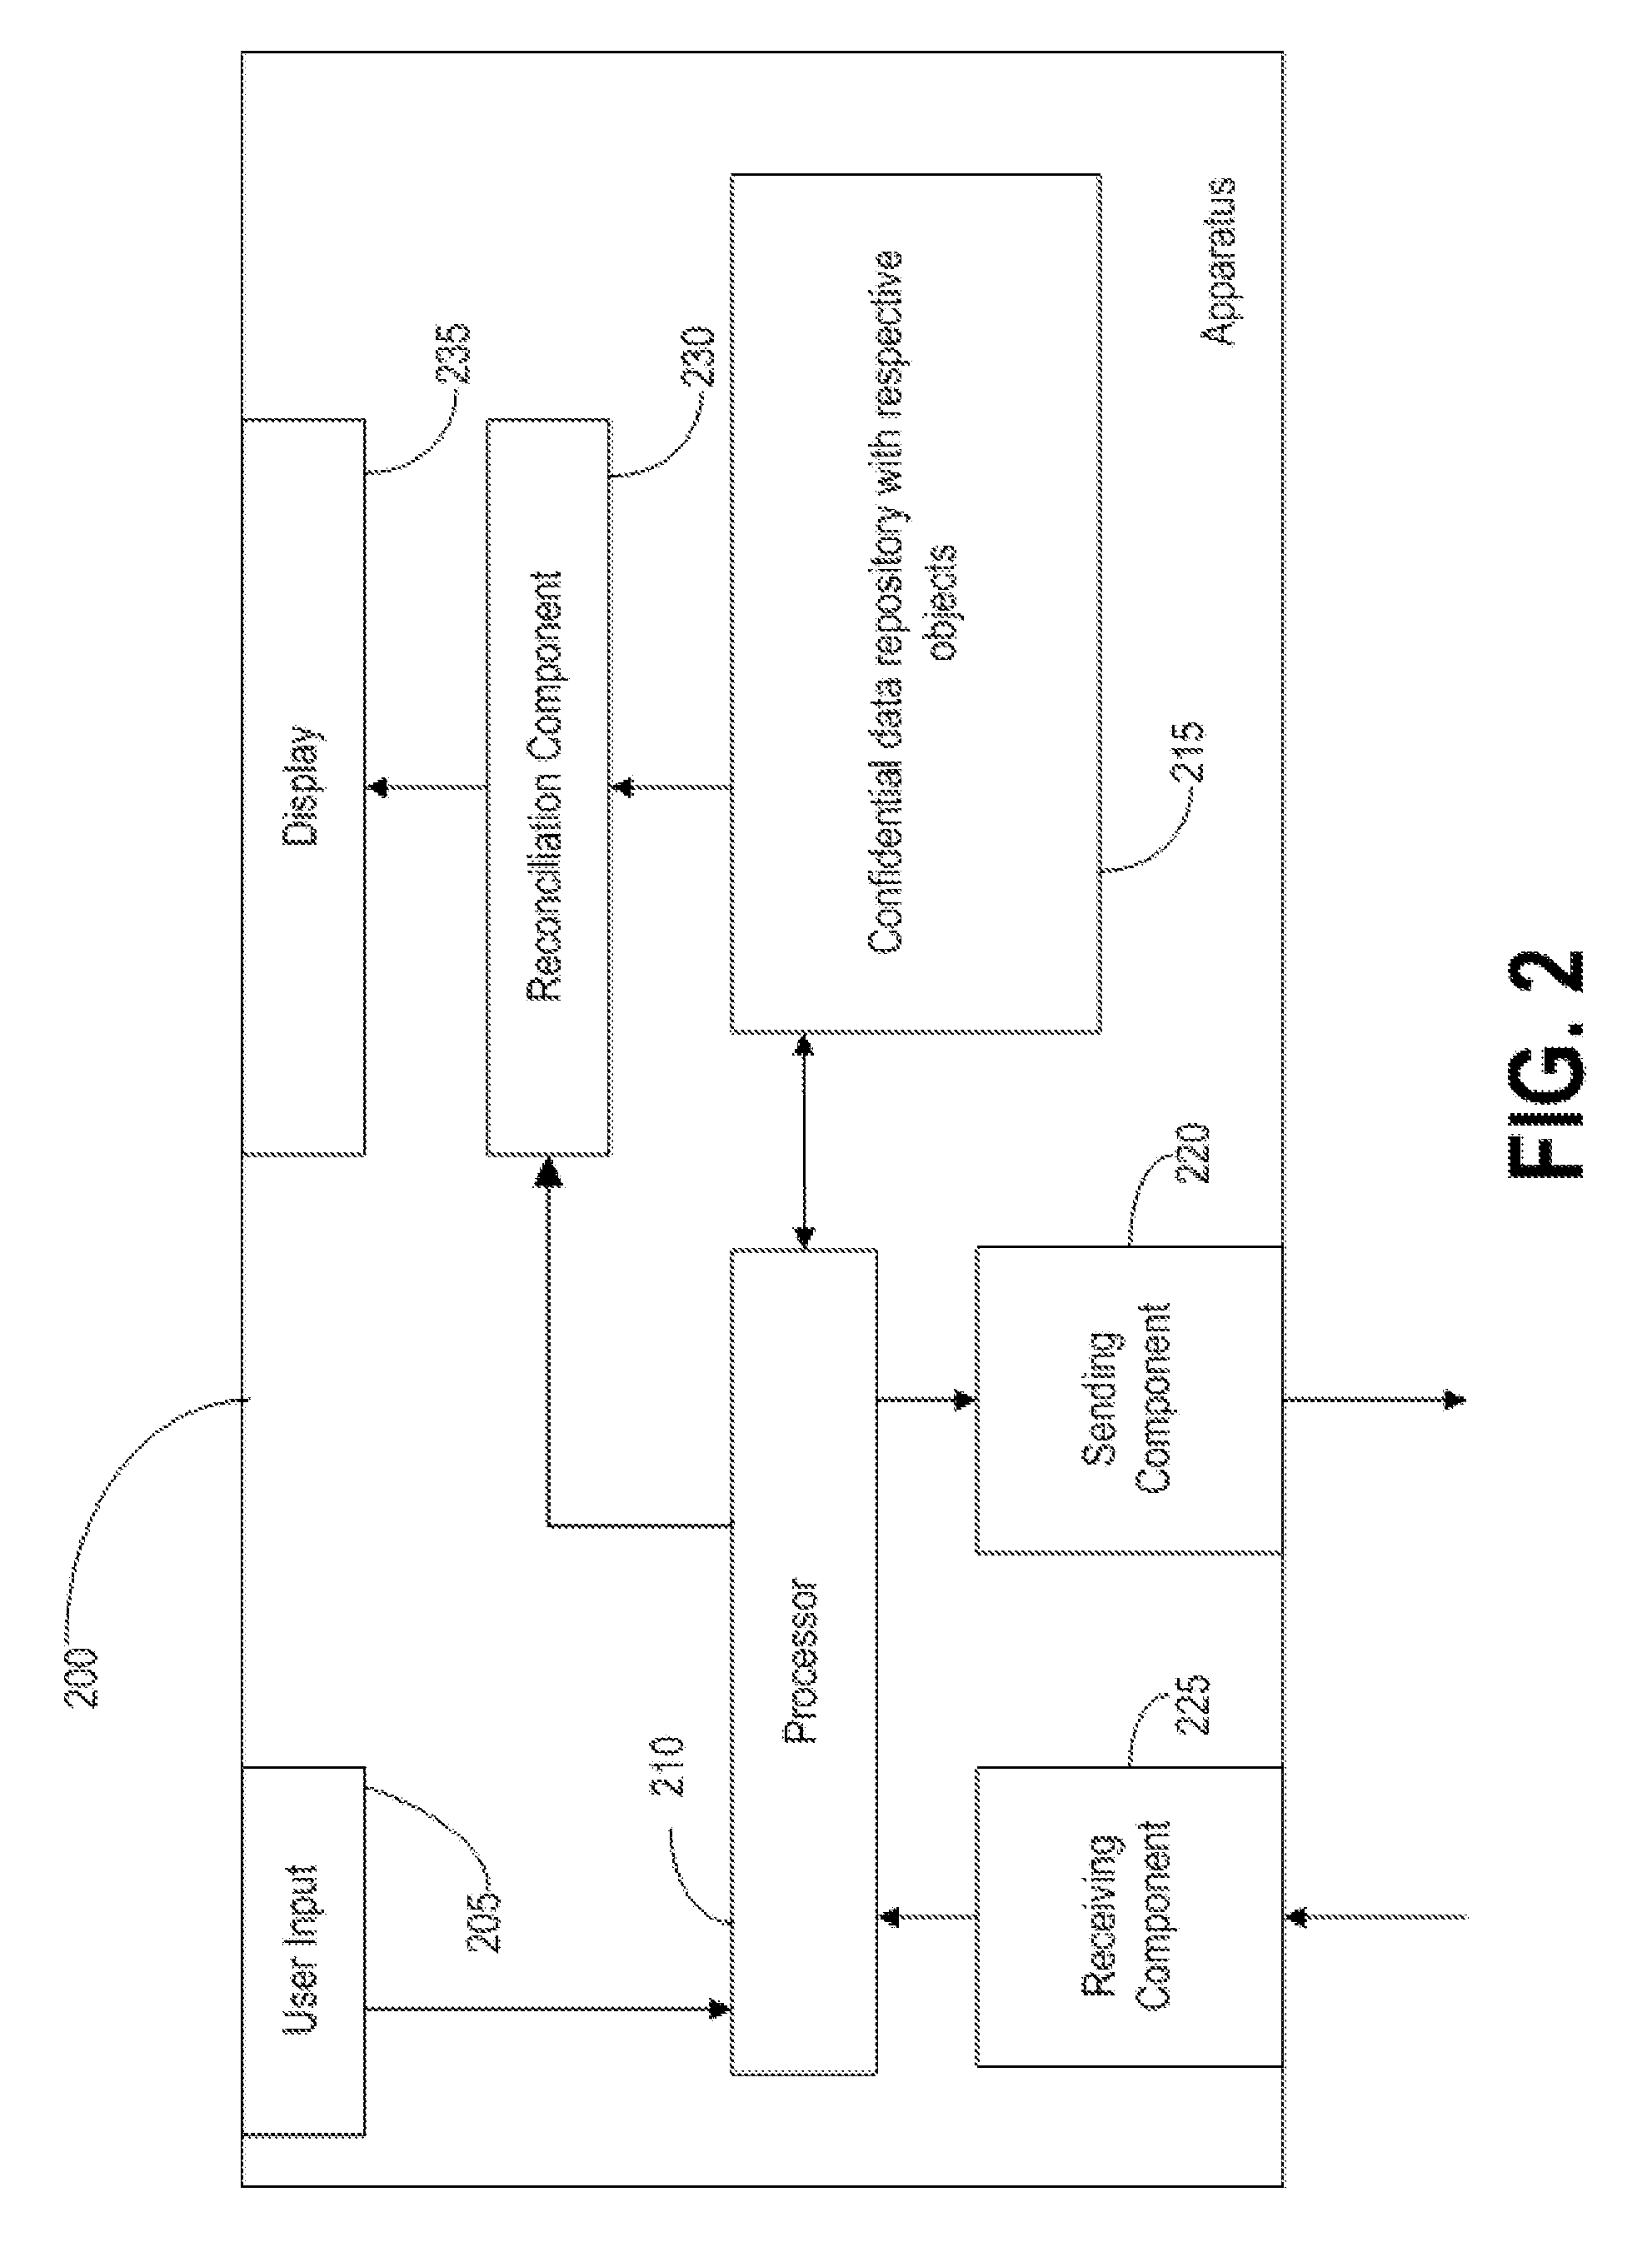 Method, apparatus, and computer program product for isolating personal data